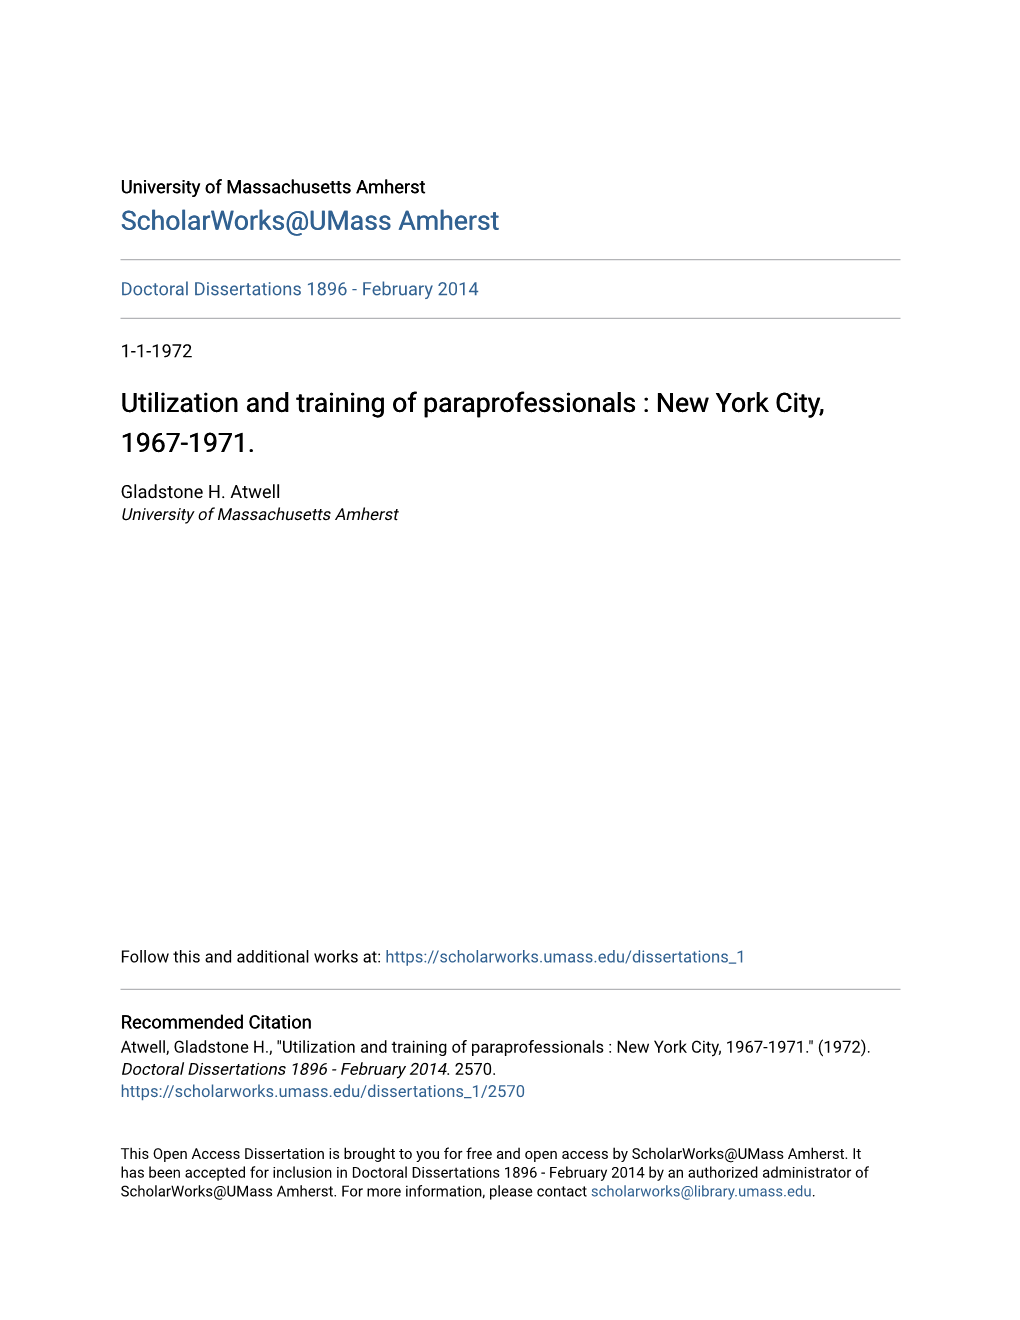 Utilization and Training of Paraprofessionals : New York City, 1967-1971